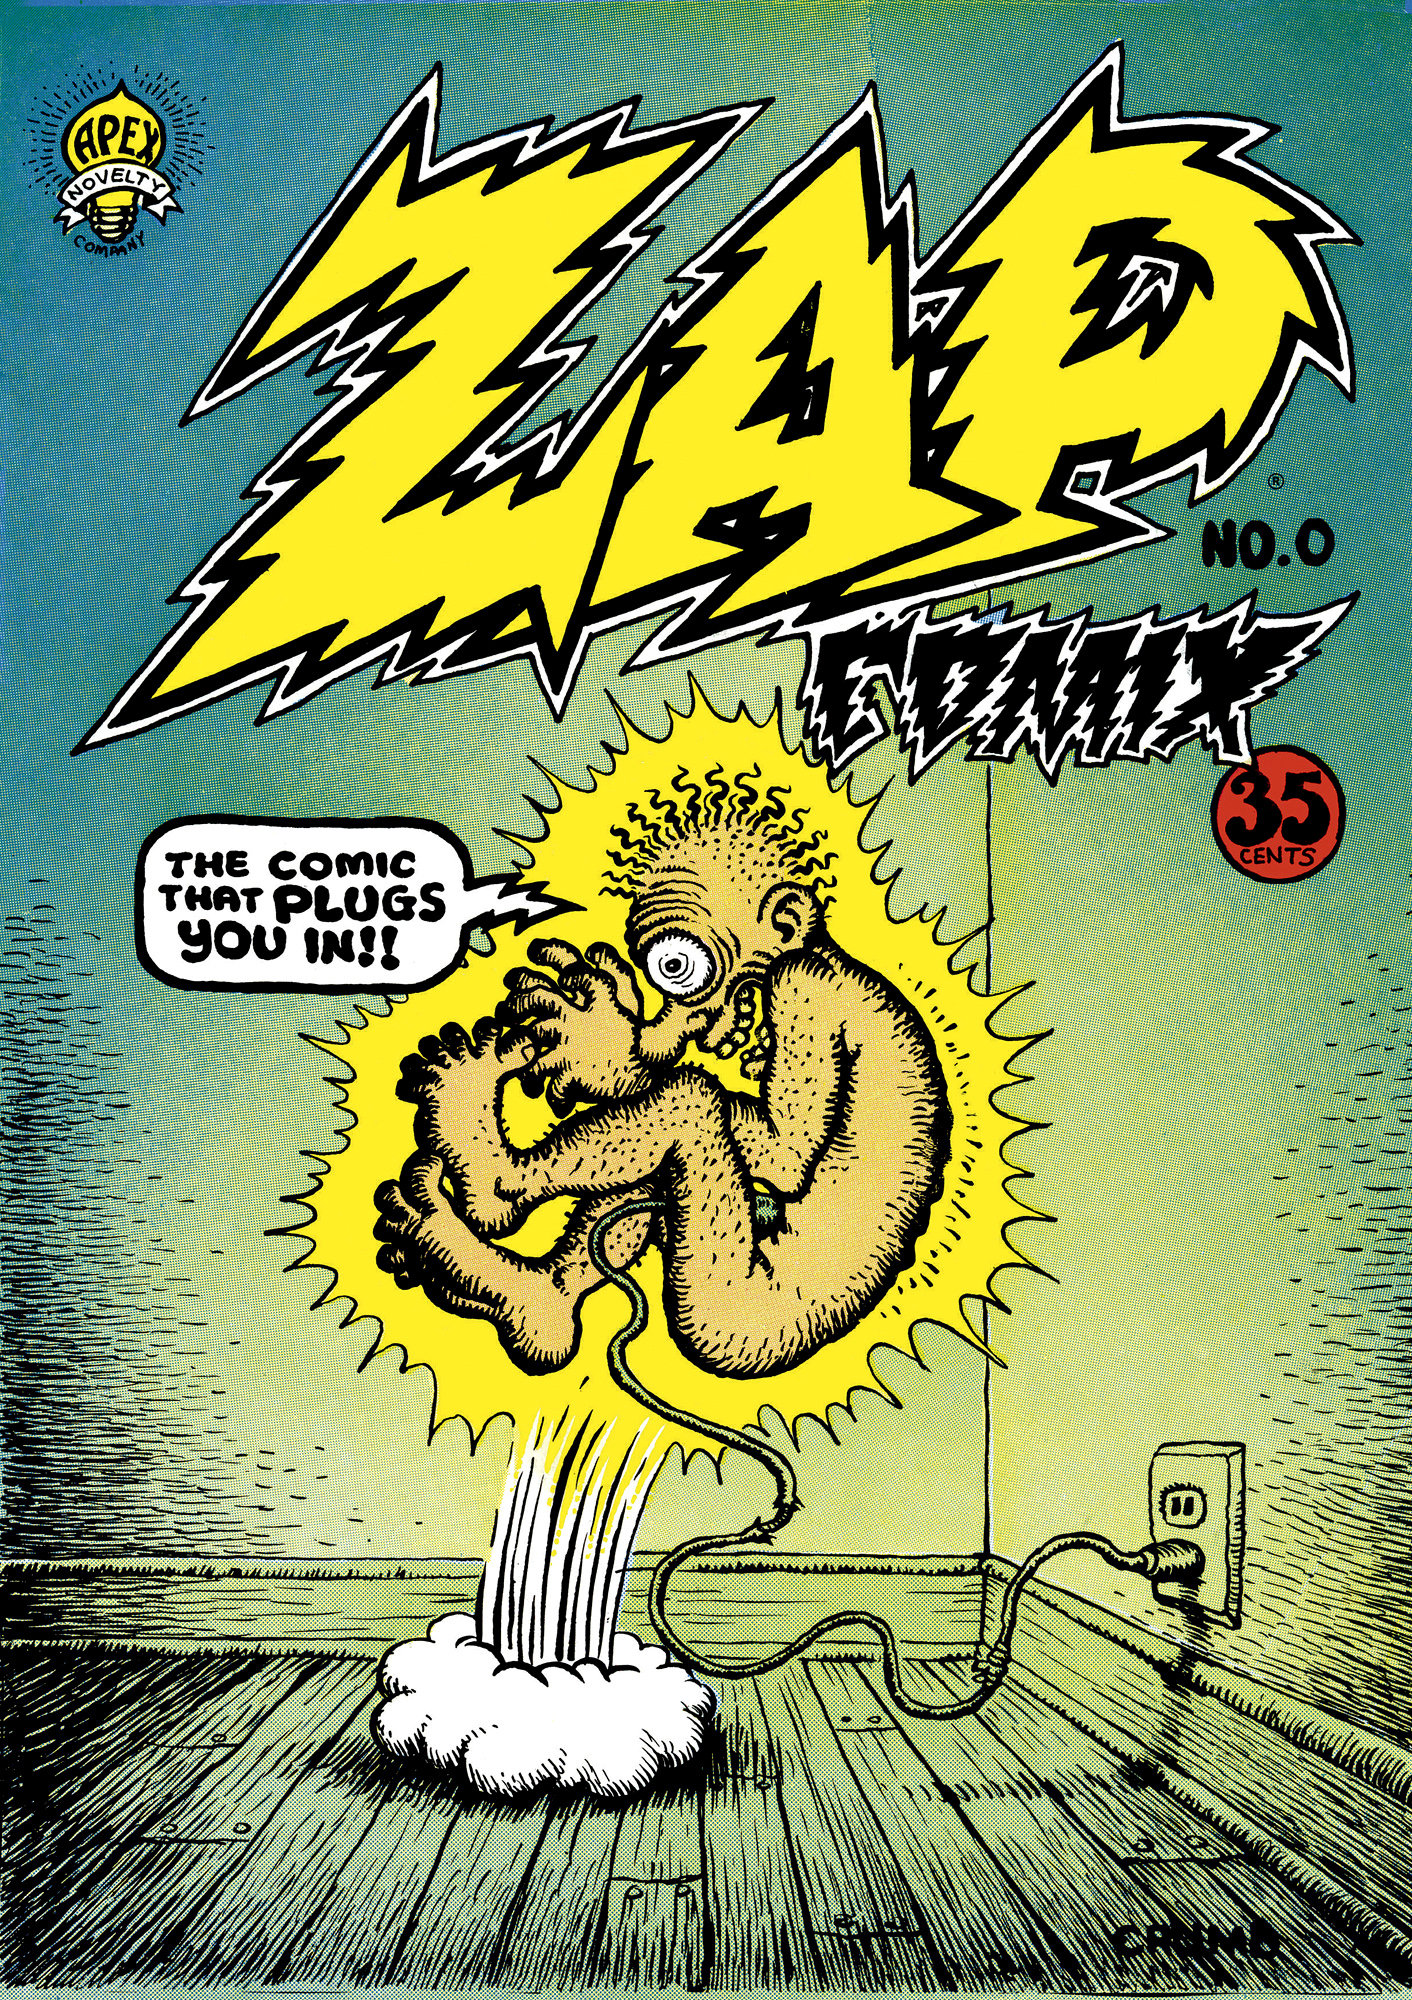 Zap Issue 0 - front cover